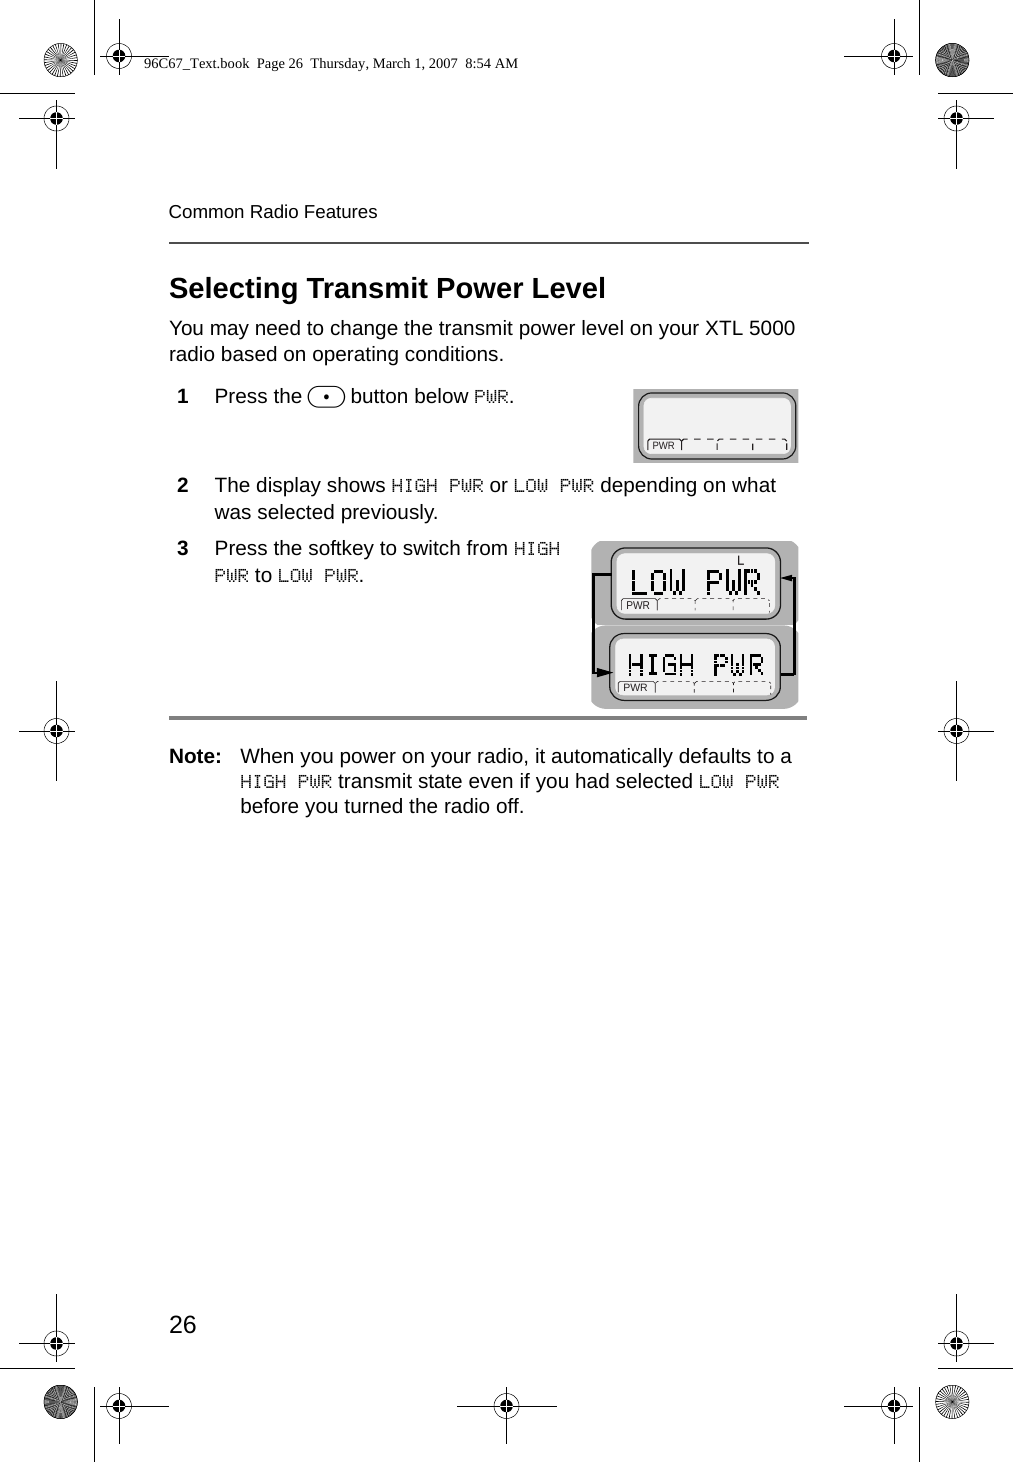 26Common Radio FeaturesSelecting Transmit Power LevelYou may need to change the transmit power level on your XTL 5000 radio based on operating conditions. Note: When you power on your radio, it automatically defaults to a HIGH PWR transmit state even if you had selected LOW PWR before you turned the radio off.1Press the m button below PWR.2The display shows HIGH PWR or LOW PWR depending on what was selected previously.3Press the softkey to switch from HIGH PWR to LOW PWR. PWR  PWR  RPWR  96C67_Text.book  Page 26  Thursday, March 1, 2007  8:54 AM